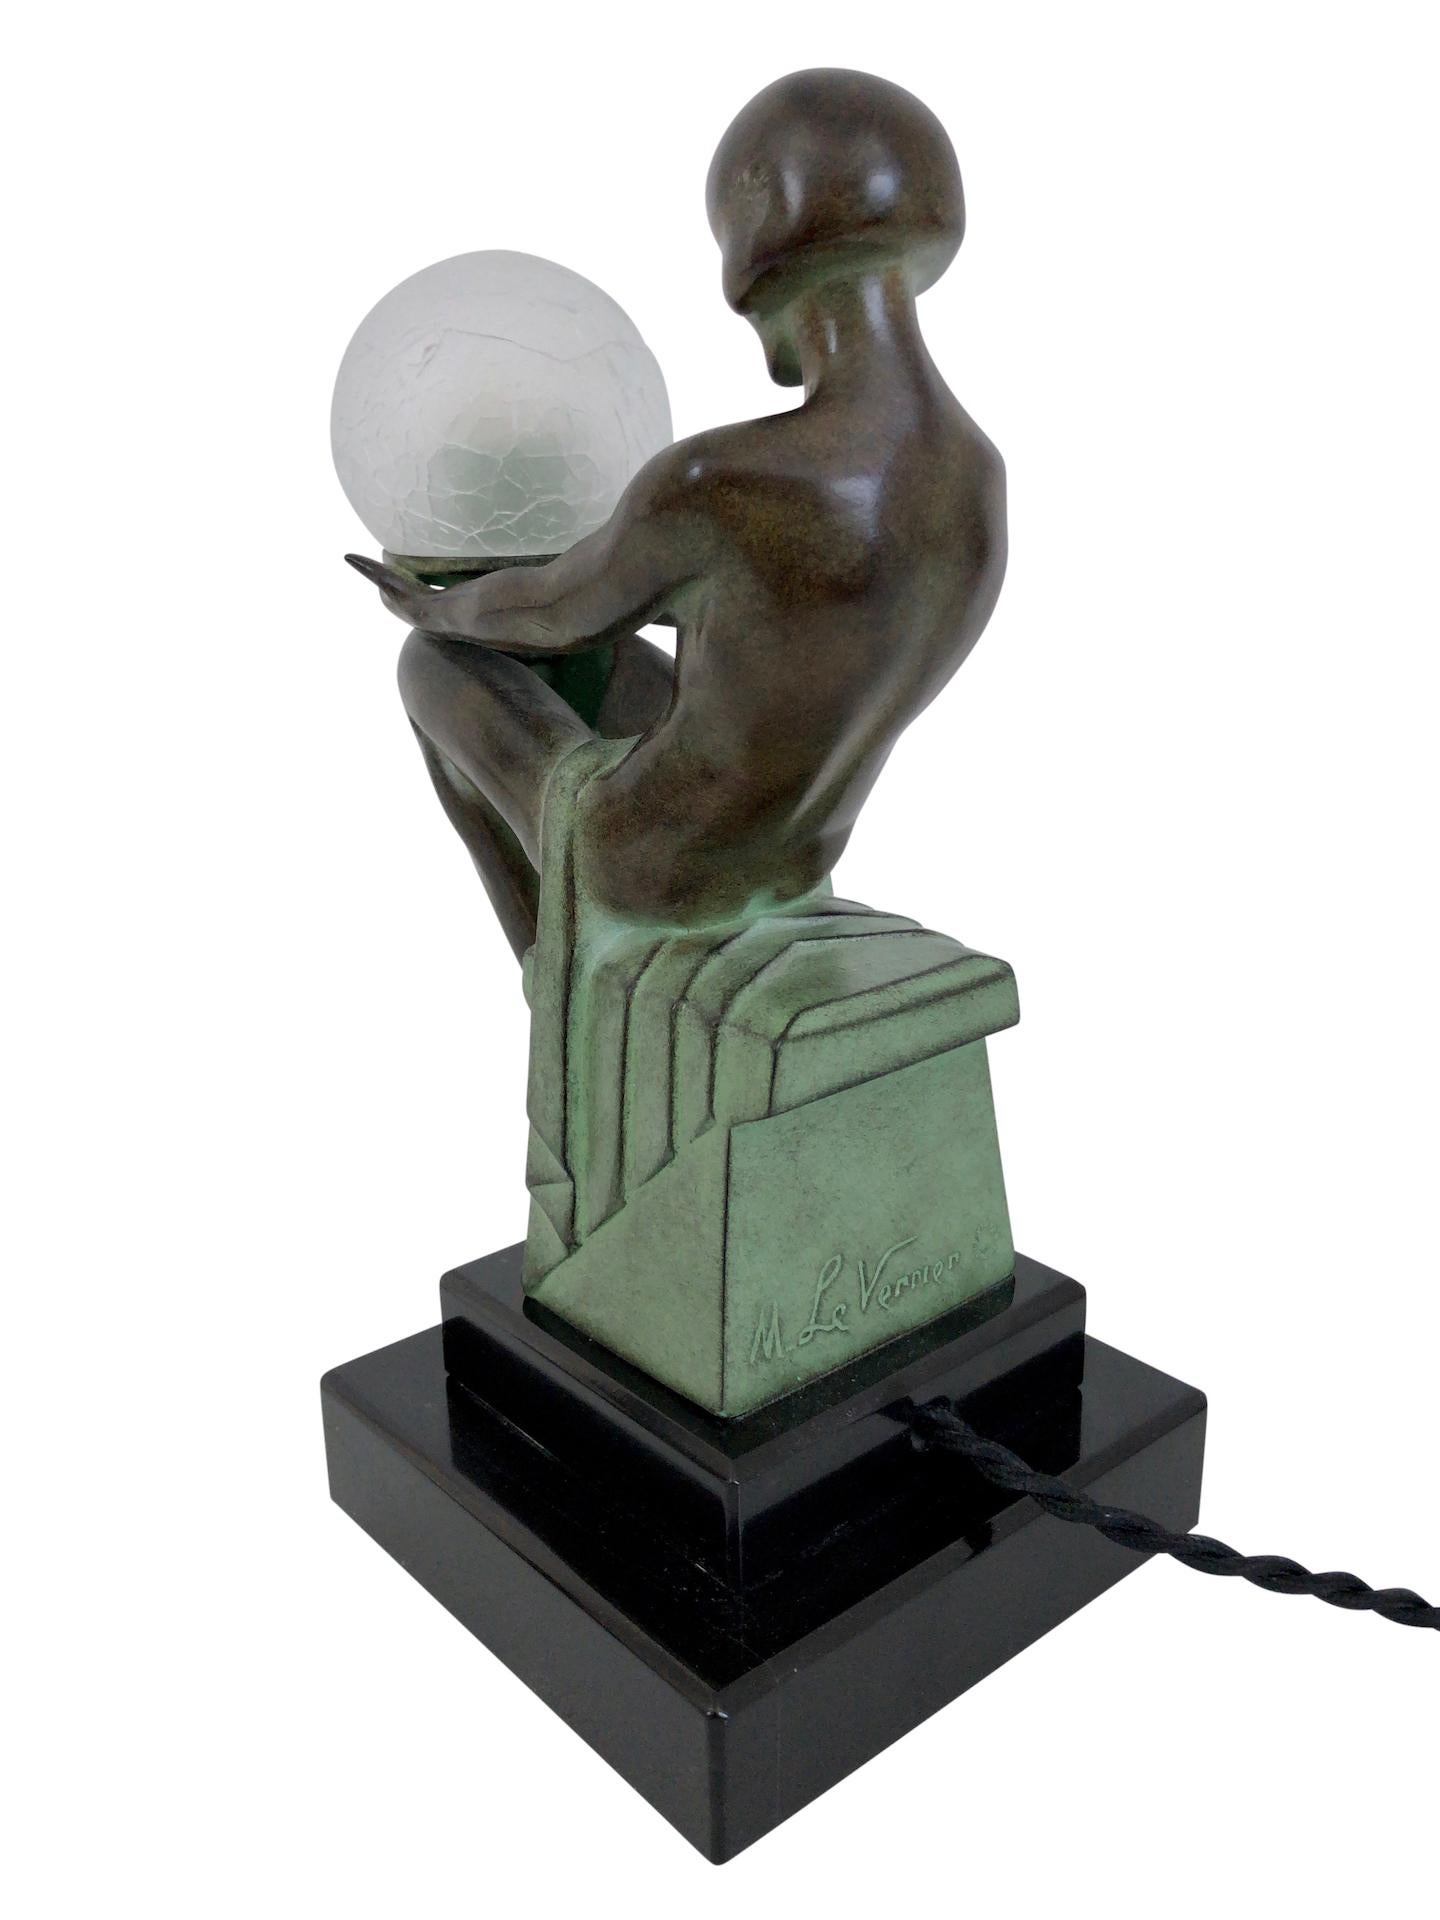 Delassement Lumineux French Art Deco Style Nude Sculpture Lamp by Max Le Verrier 8